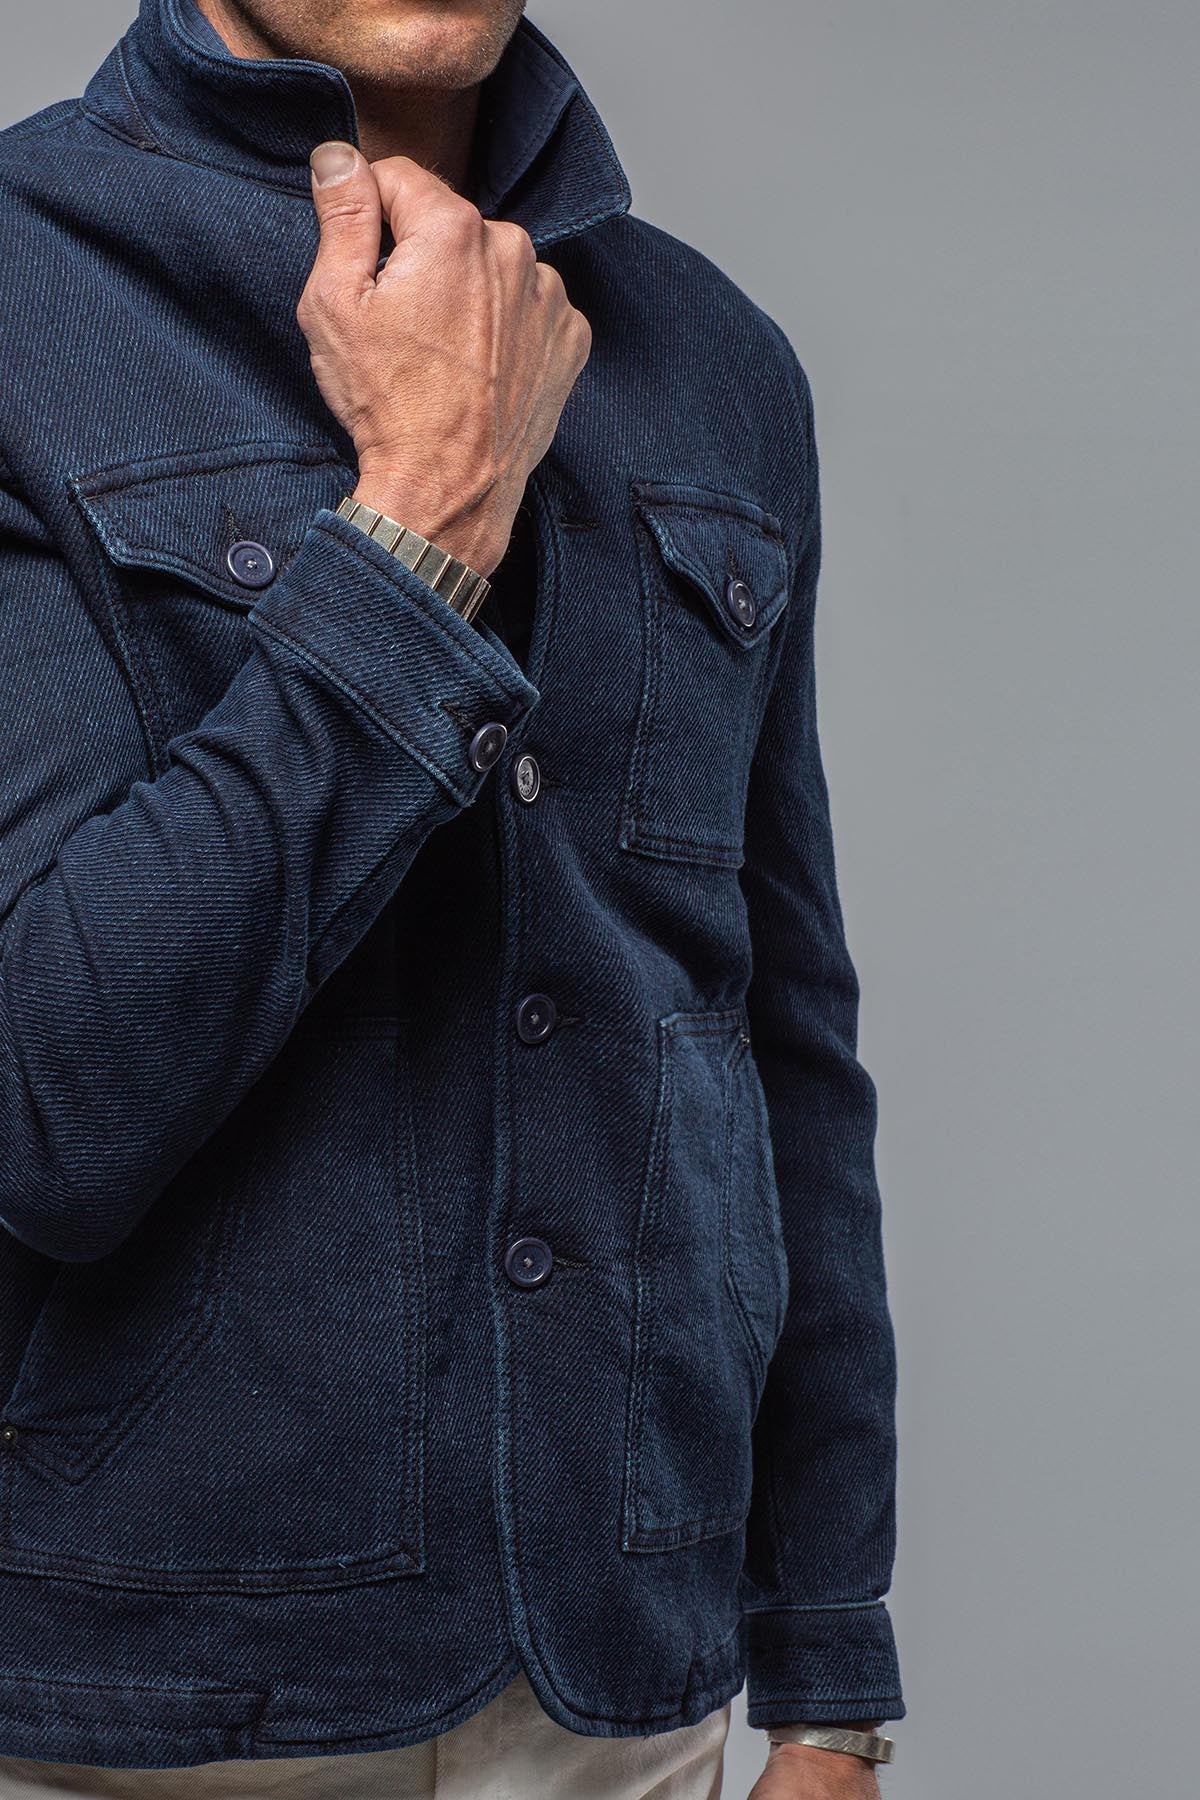 Chase Jean Jacket | Mens - Outerwear - Overshirts | Teleria Zed